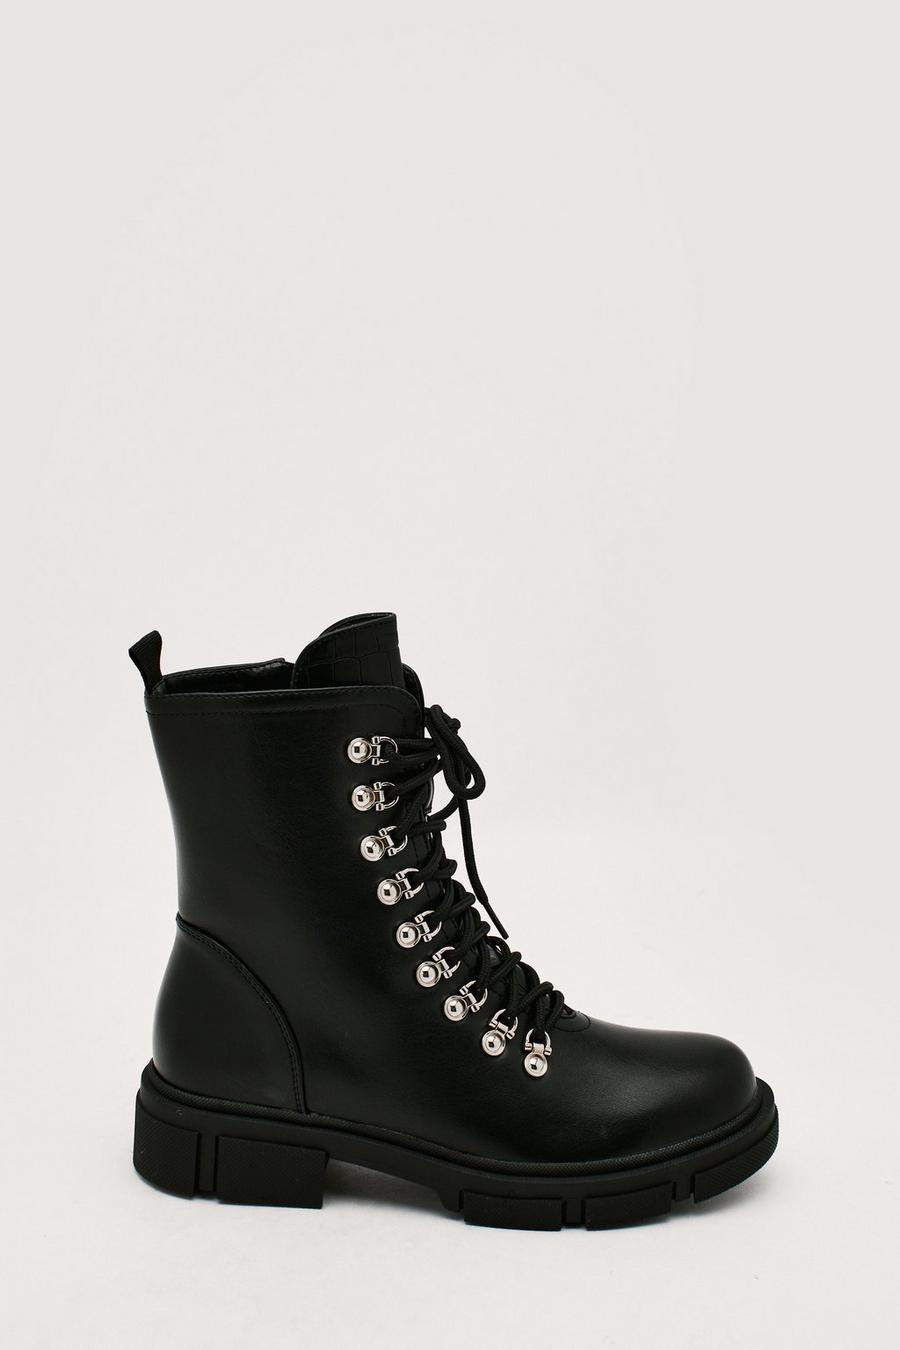 D Ring Lace Up Hiker Boots 